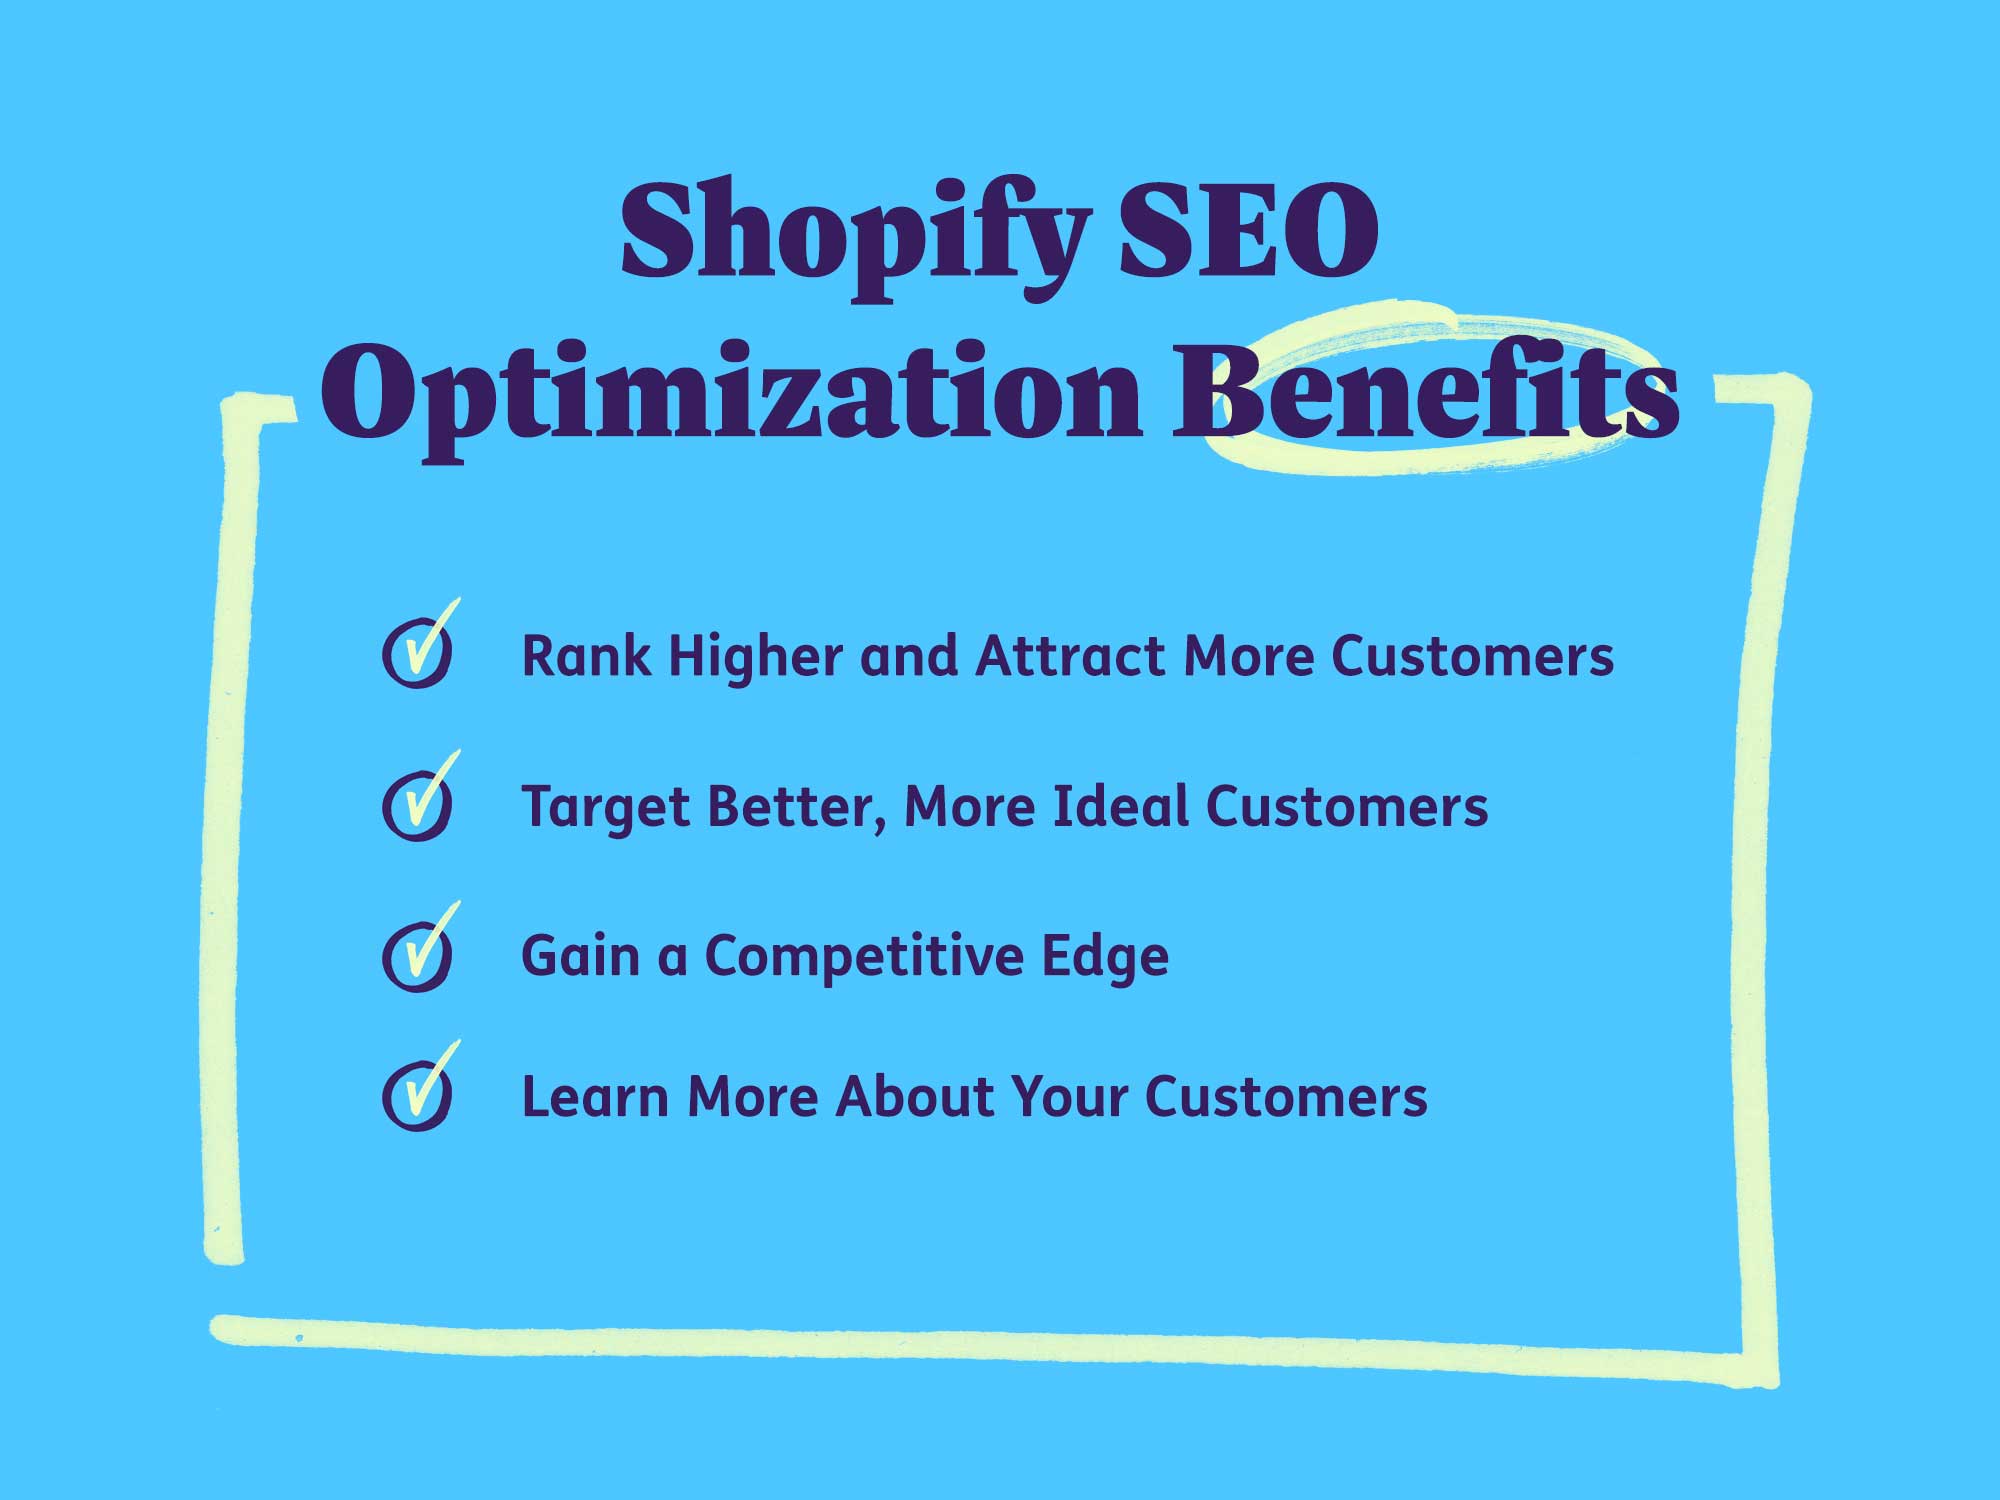 The benefits of Shopify SEO optimization include ranking higher and attracting more customers, targeting better, more ideal customers, gaining a competitive edge, and being able to learn more about your customers.